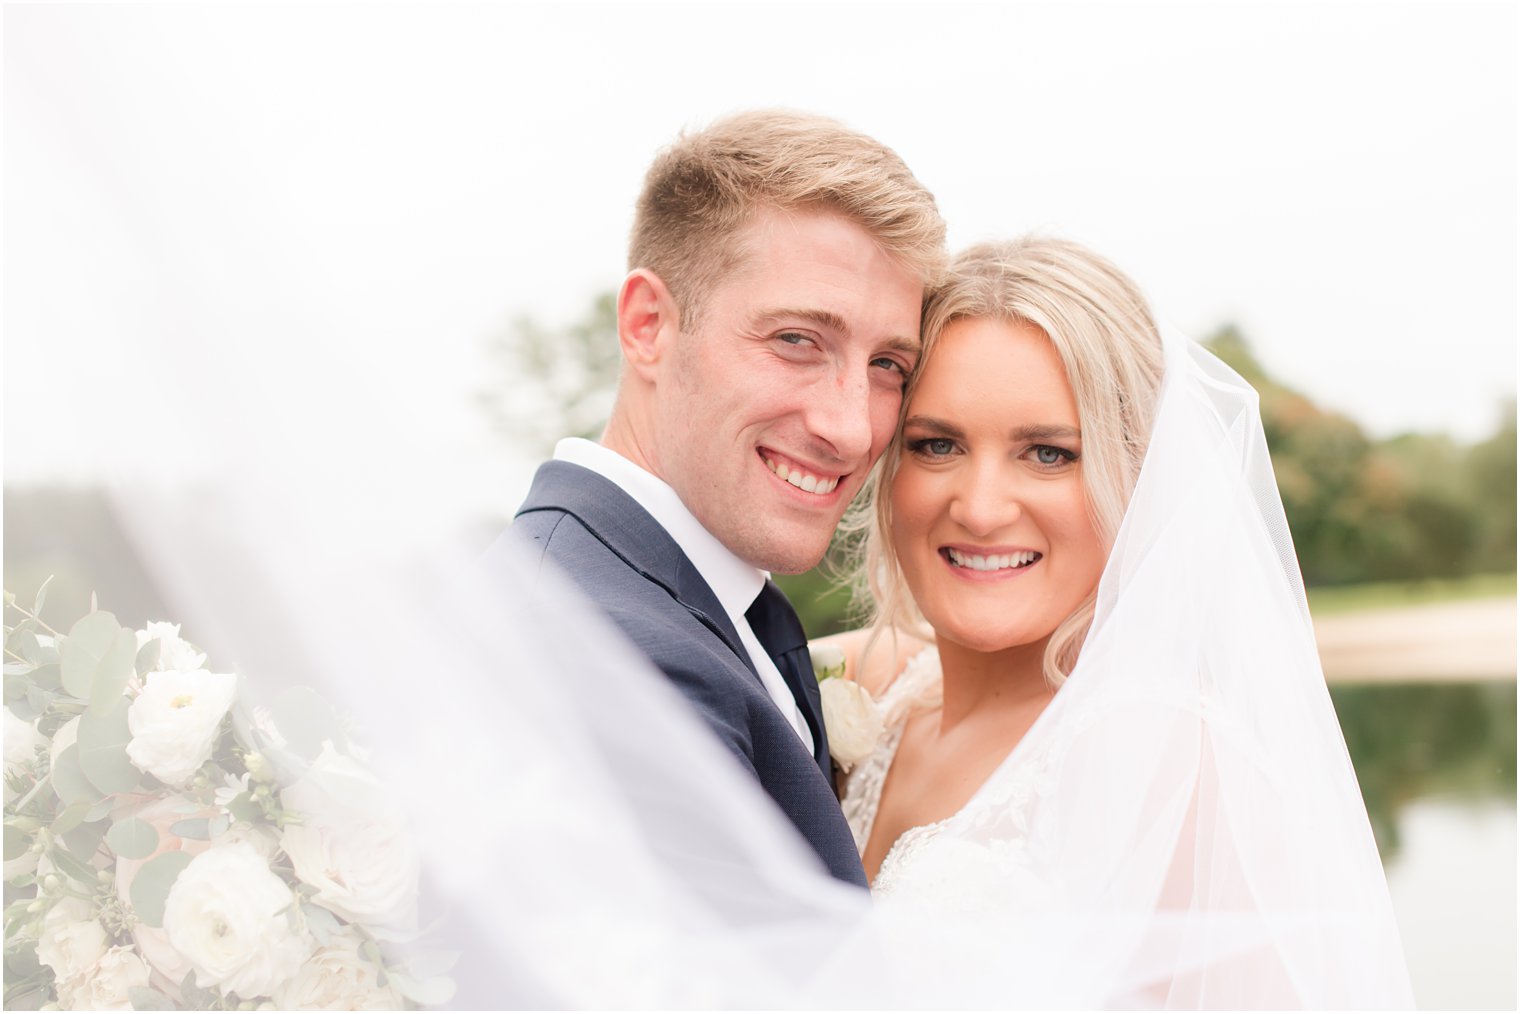 newlyweds lean heads together with veil wrapped around them